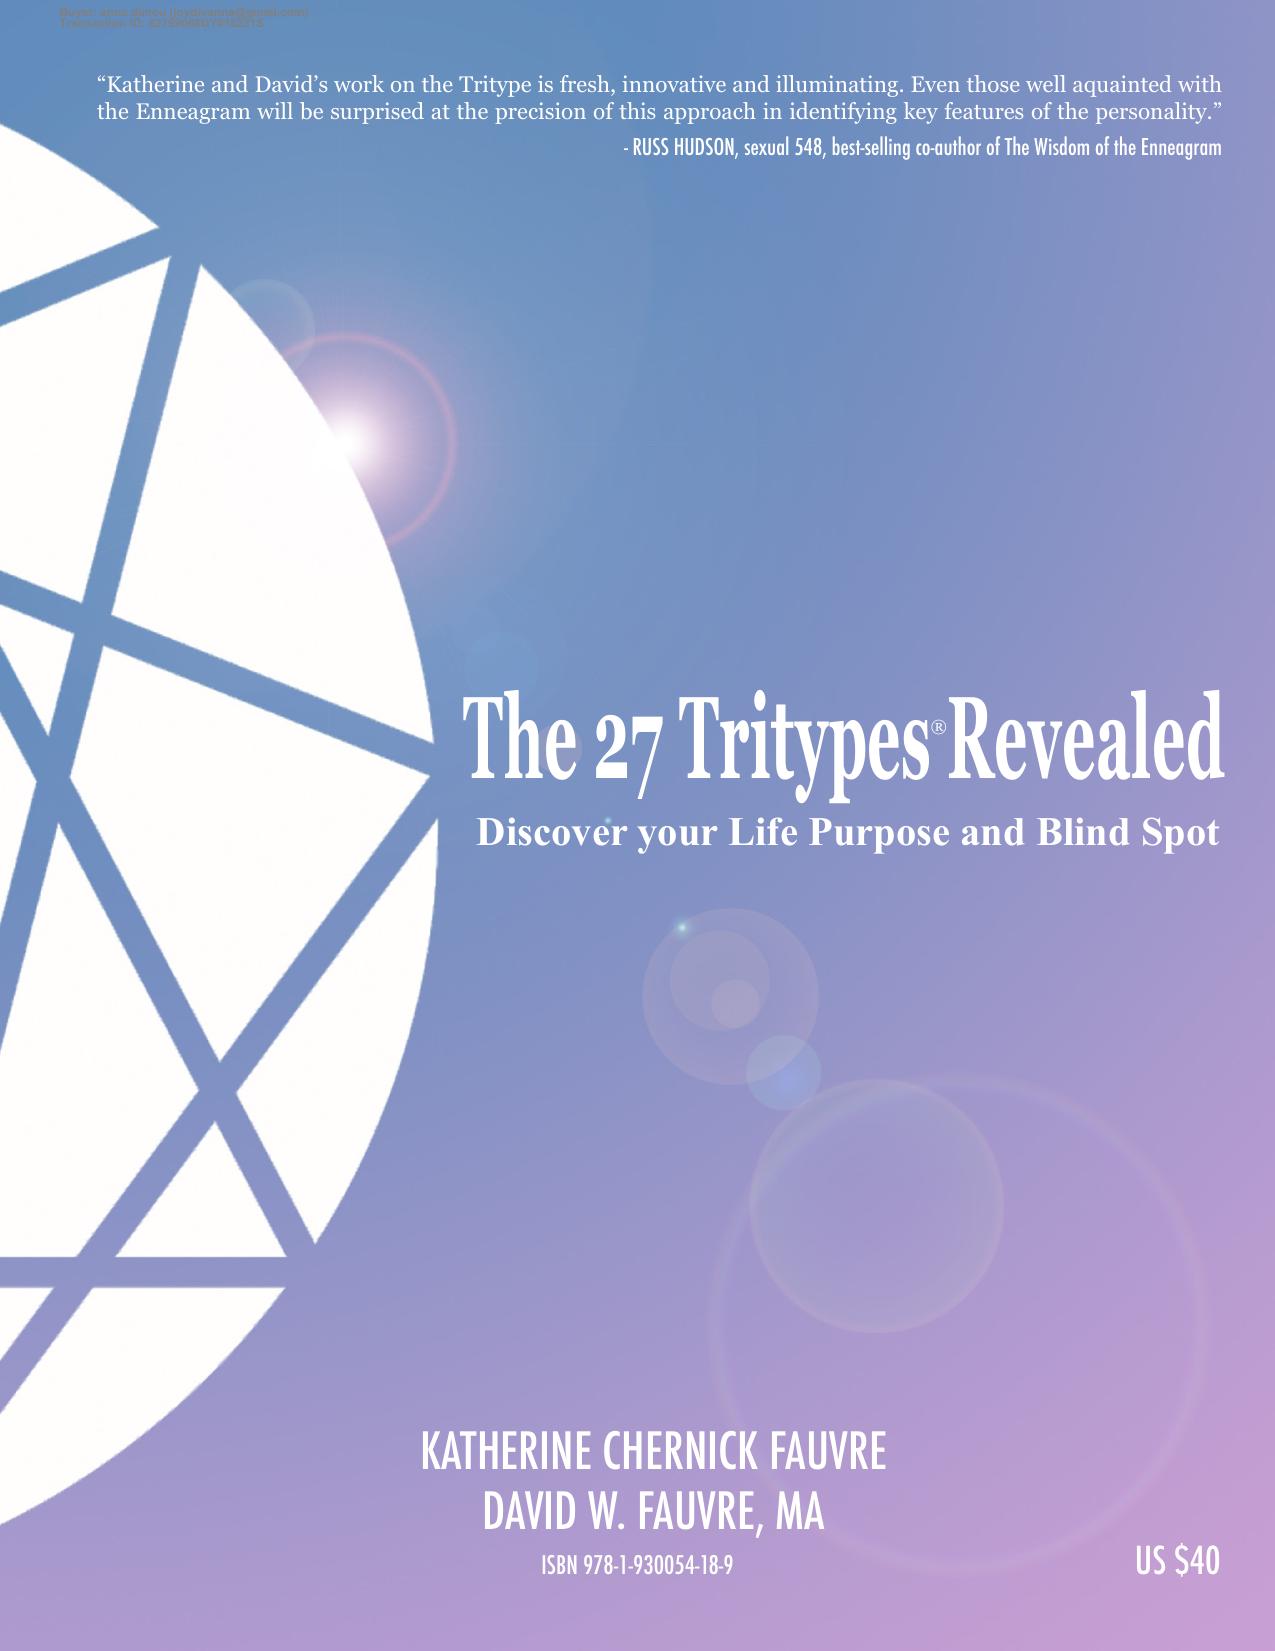 The 27 Tritypes® Revealed: Discover Your Life Purpose and Blind Spot